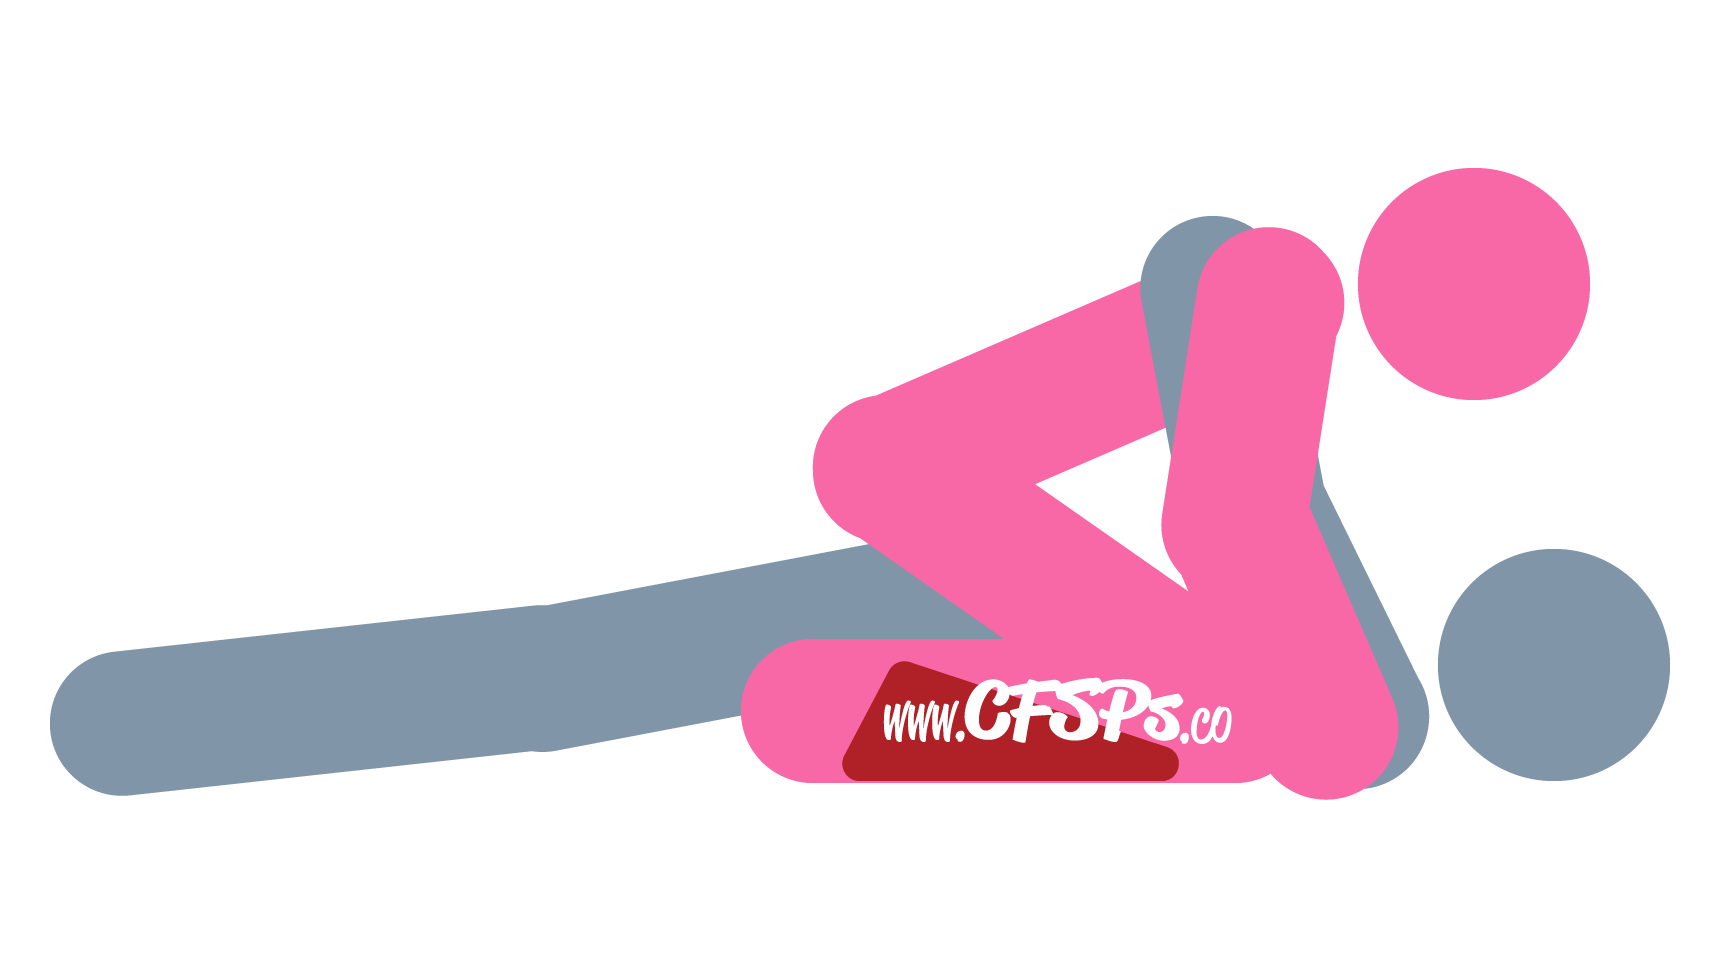 This stick figure image depicts a man and woman having sex in the Rodeo sex position. The man is lying on his back with a Liberator Wedge sex pillow under his butt. The woman is straddling his pelvis, leaning forward, and supporting her upper body with her hands near his shoulders.